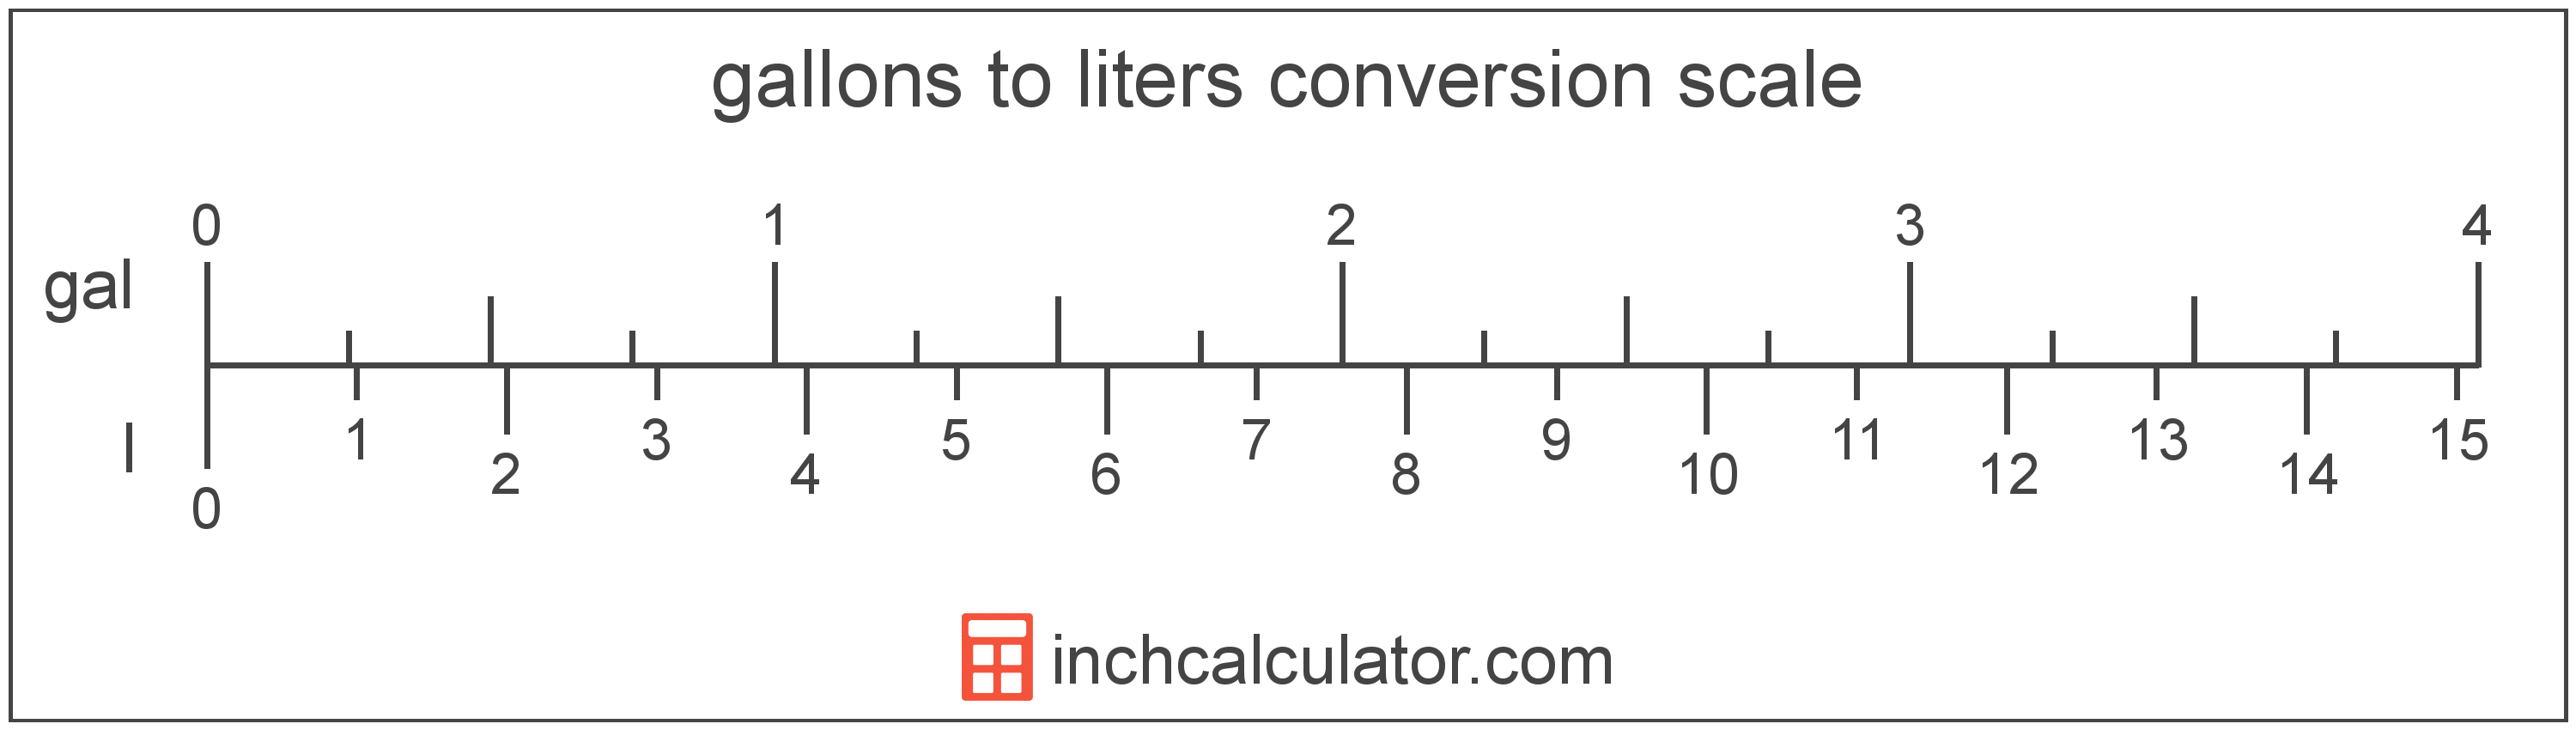 conversion scale showing gallons and equivalent liters volume values